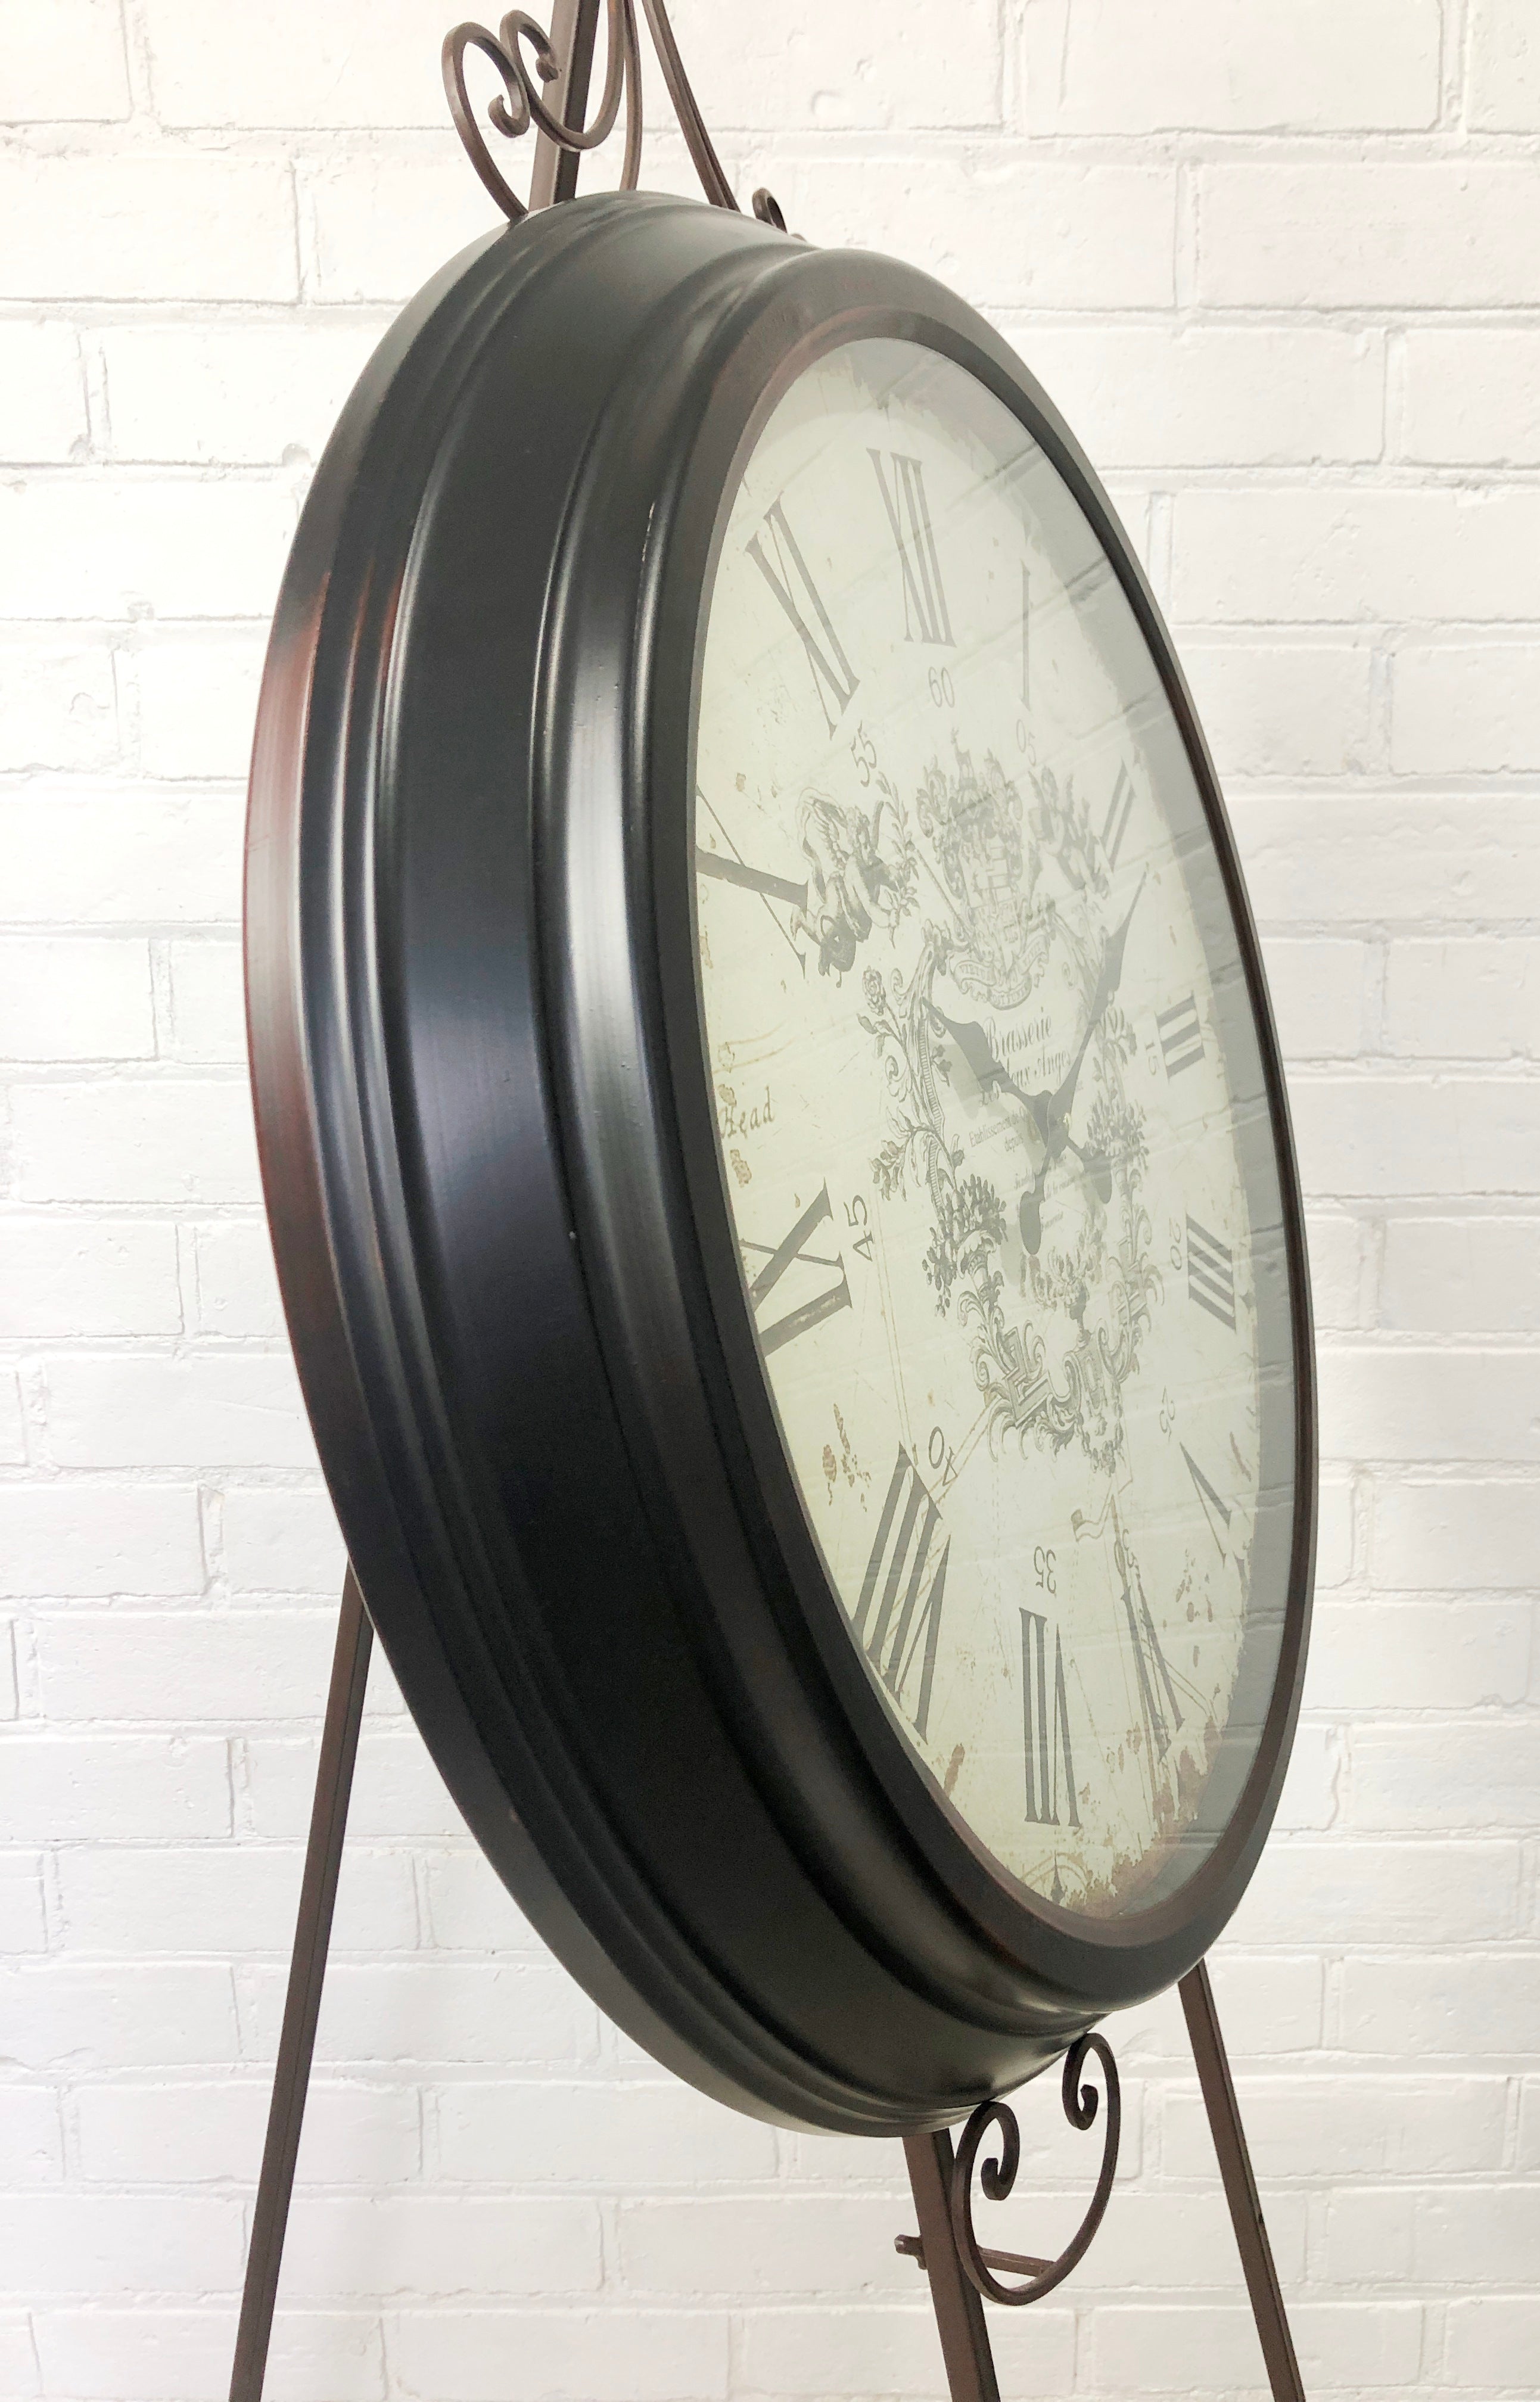 LARGE 70CM Round Metal Vintage Style Battery Clock on Display Easel | eXibit collection